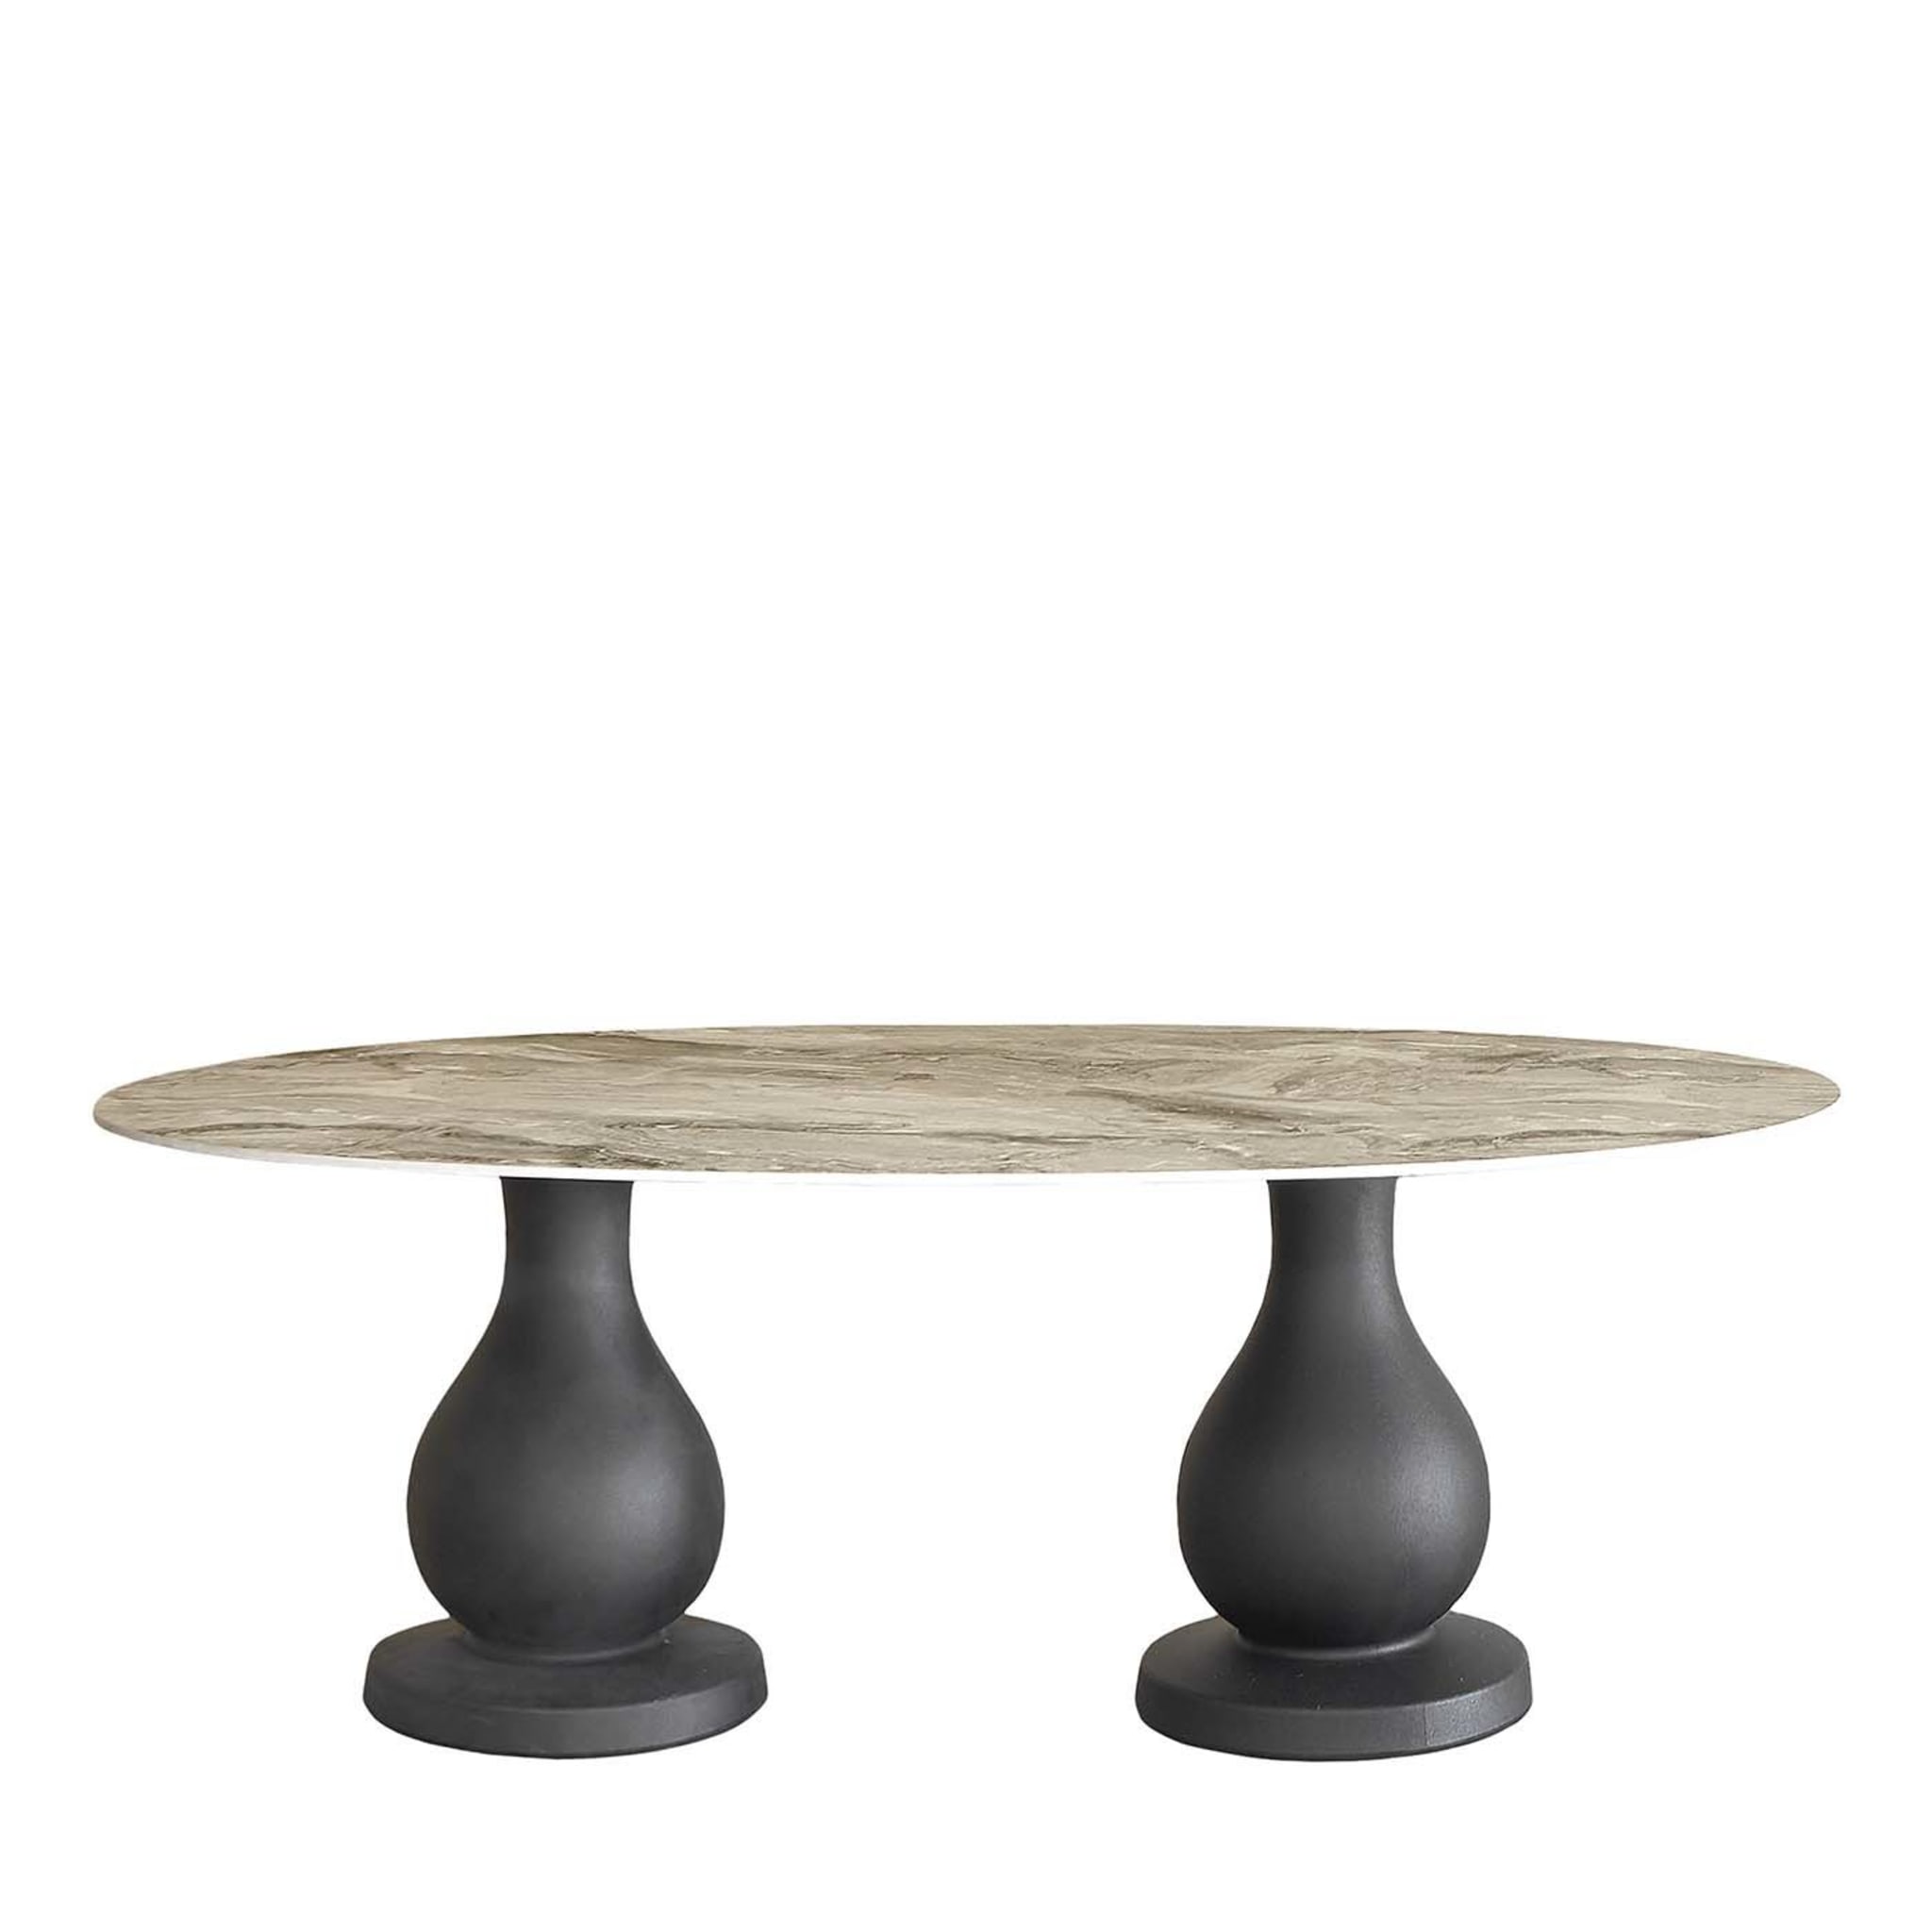 Ottocento Jet Black  and Cementino Oval Dining Table by Paola Navone - Main view